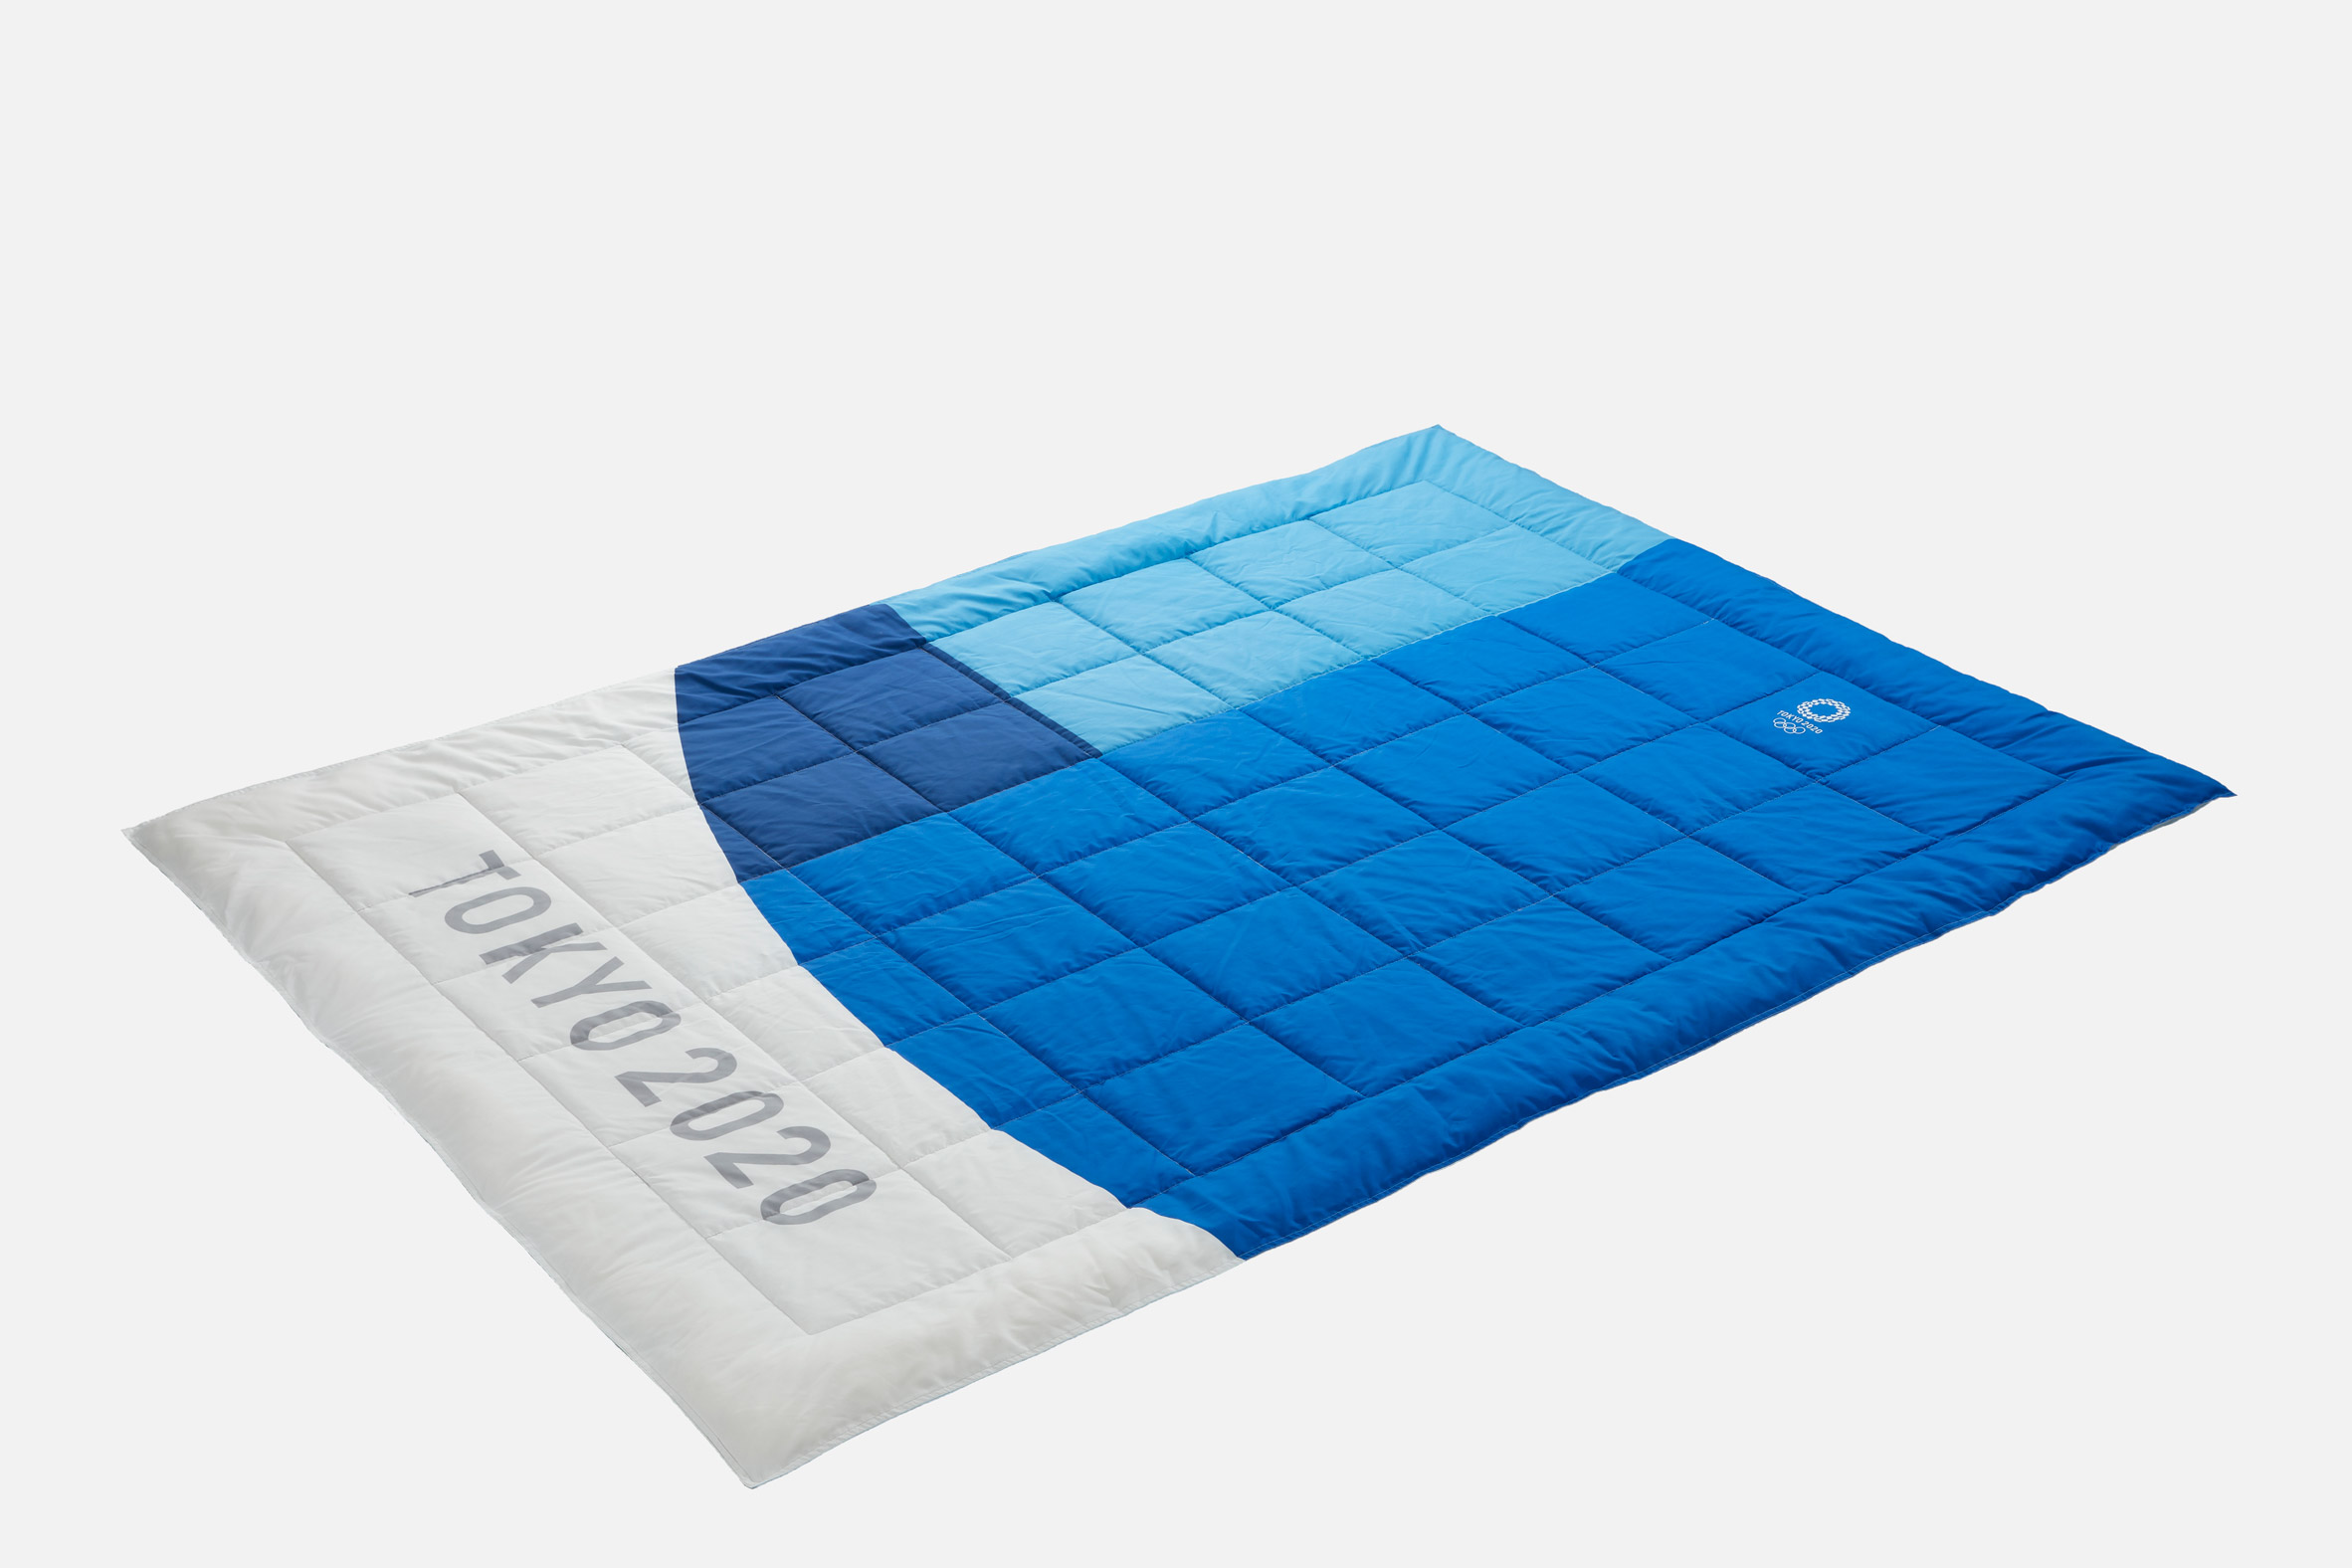 A blue and white Tokyo 2020 Olympic mattress